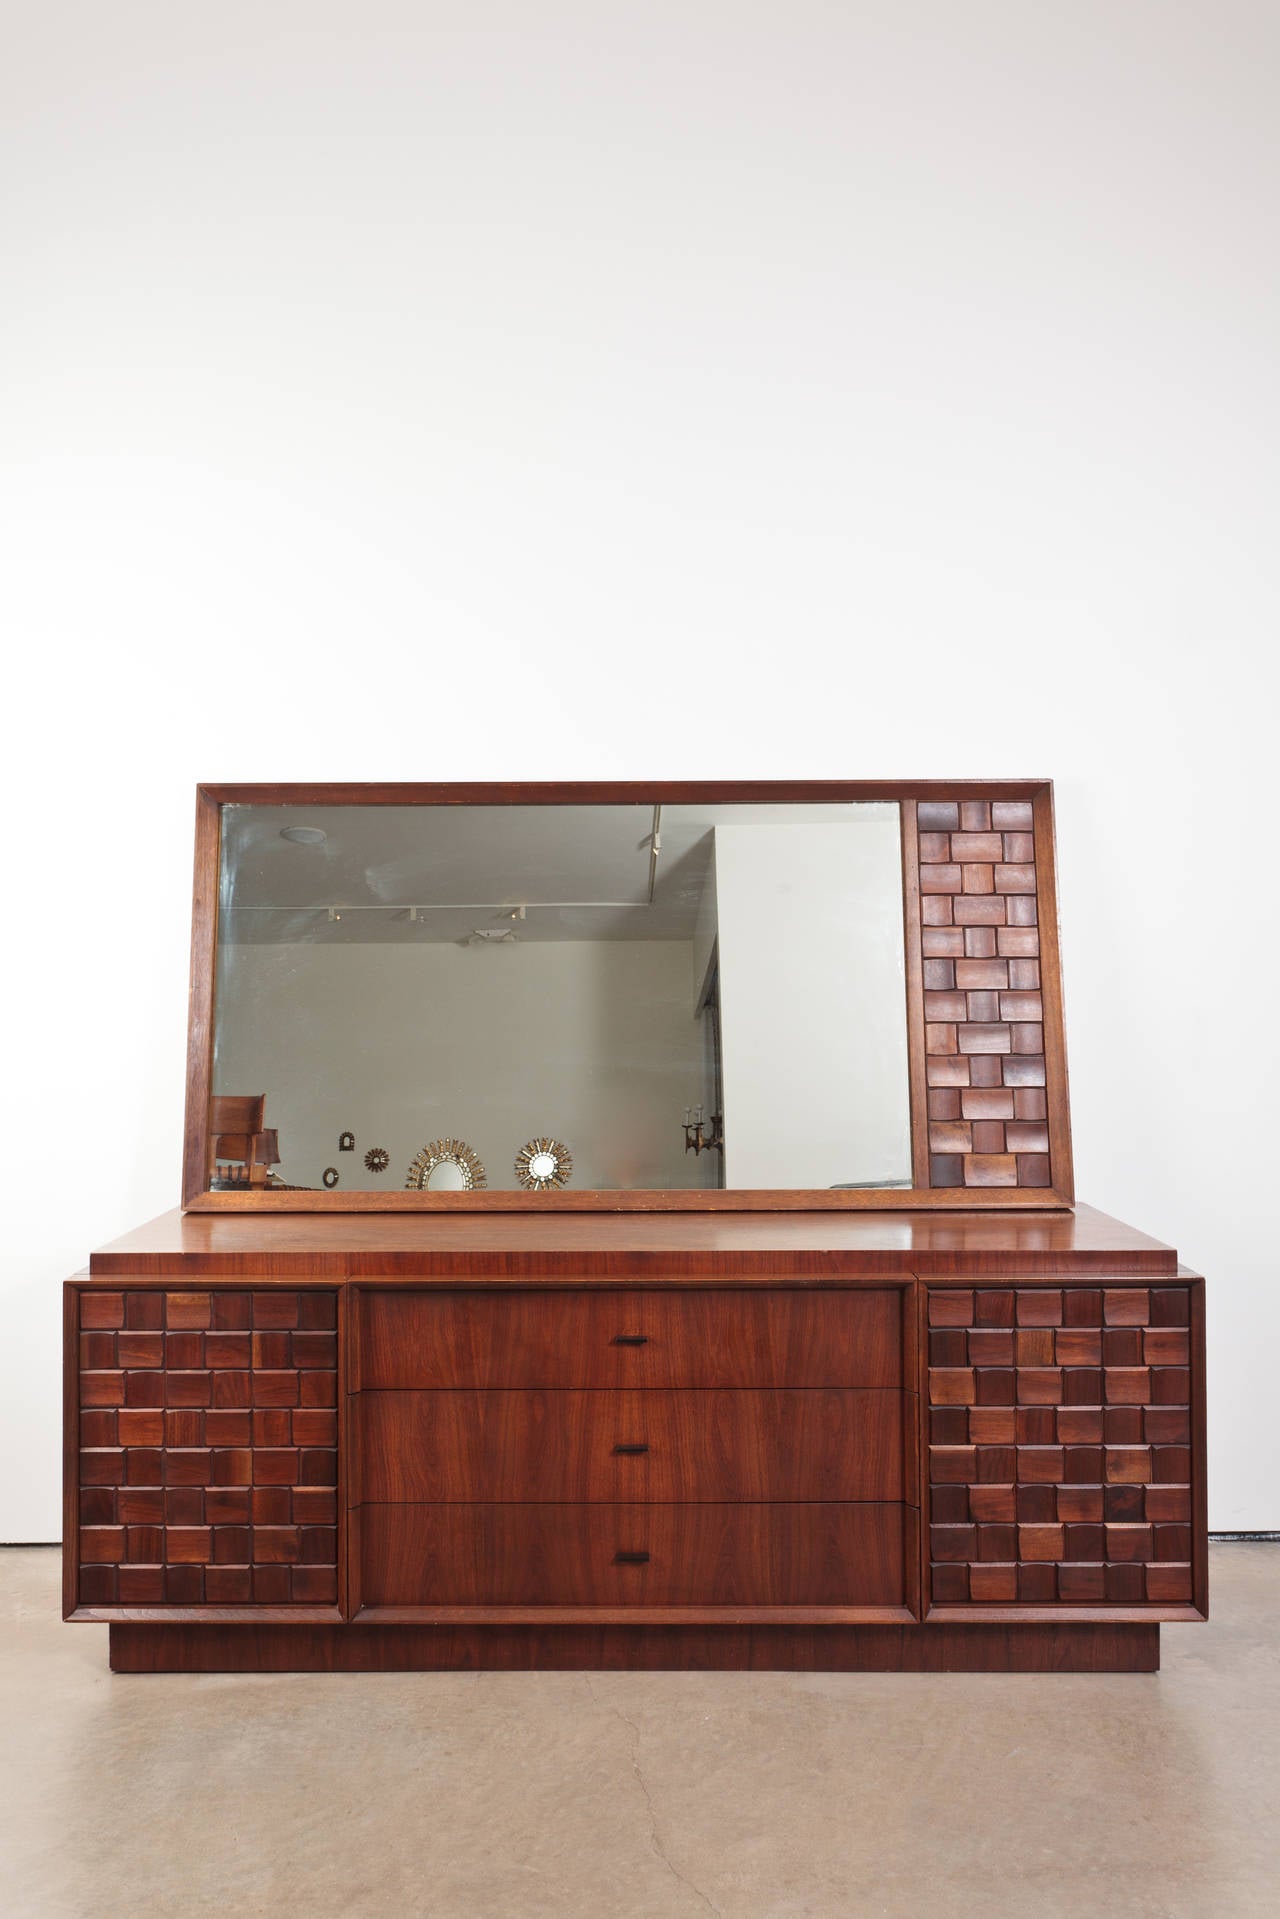 The detailing on this is exquisite. The dresser face has alternating vertical and horizontal wooden tiles providing a three dimensional look. Sturdy and handsome piece---difficult to find in this condition. Mirror not available.